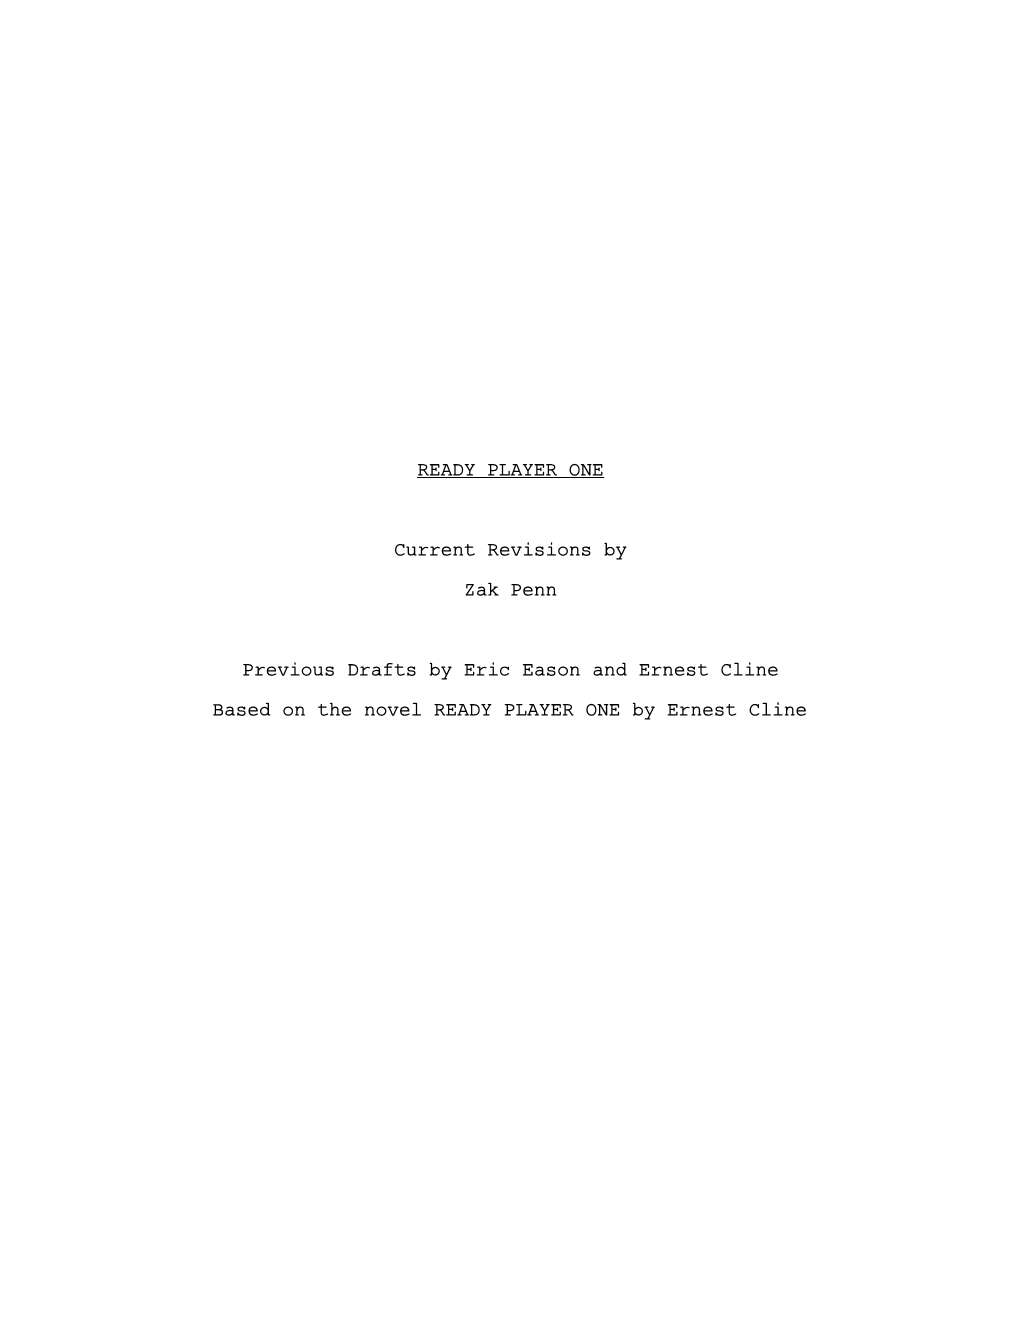 READY PLAYER ONE Current Revisions by Zak Penn Previous